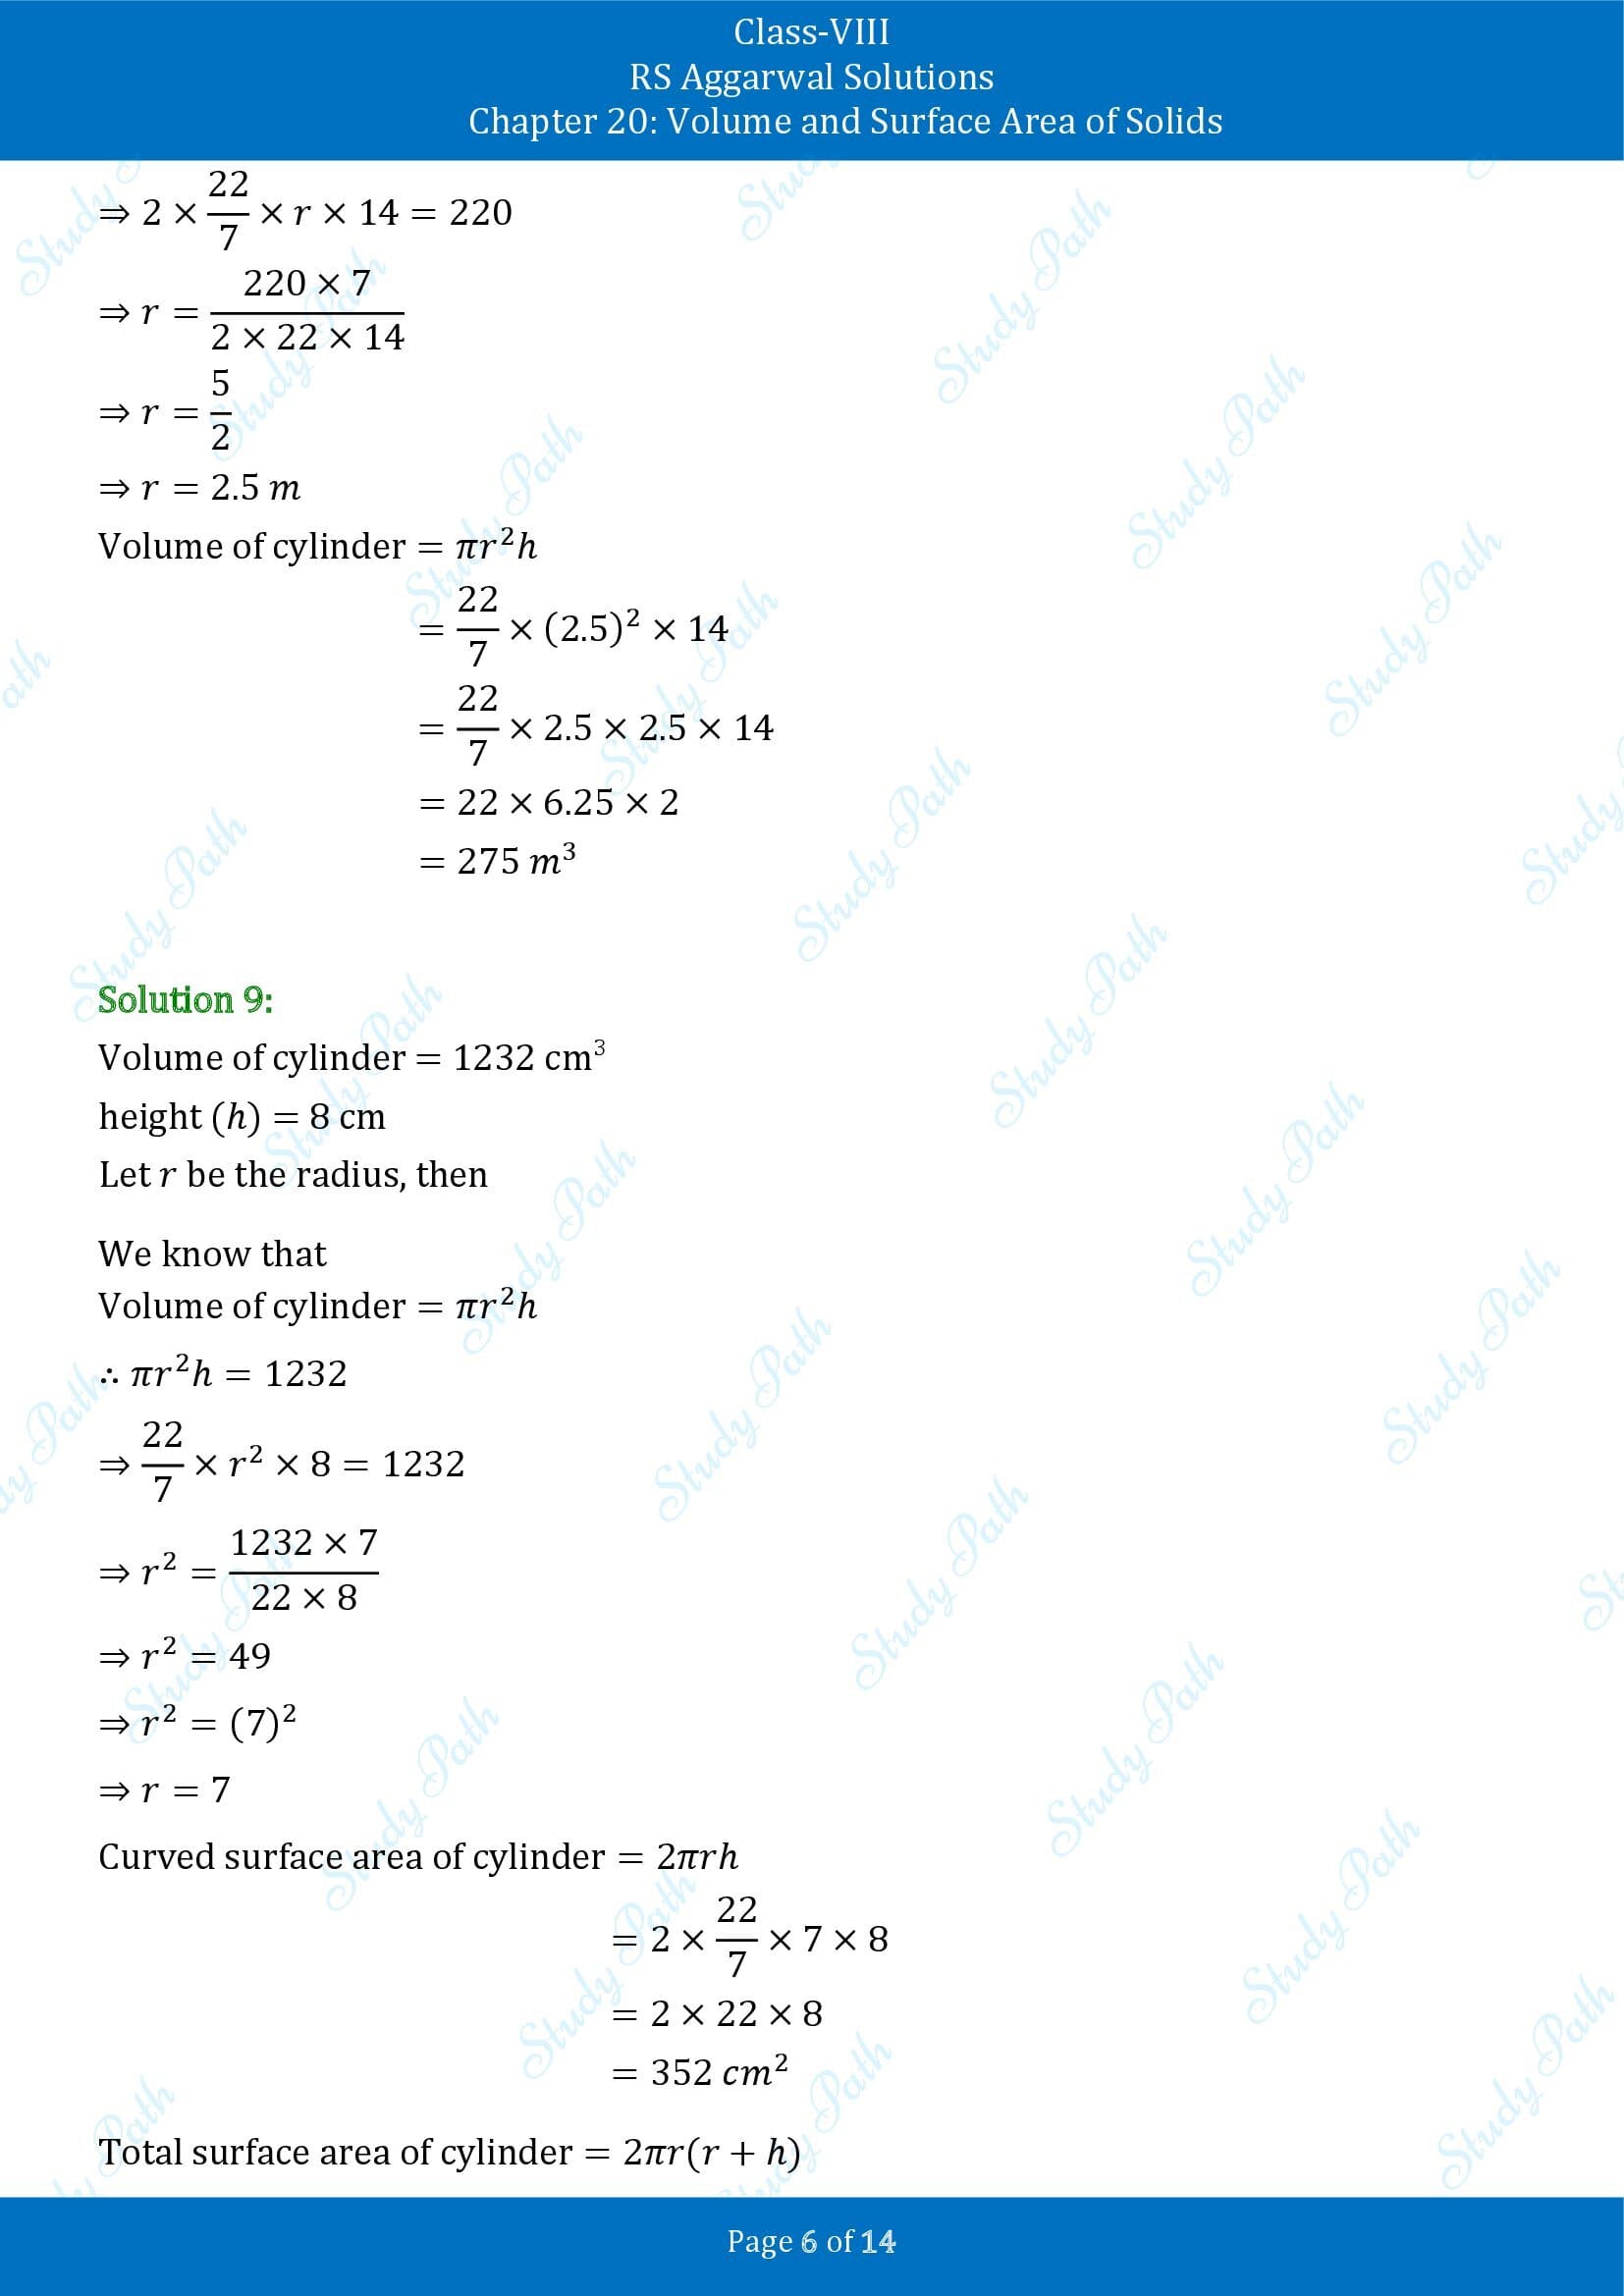 RS Aggarwal Solutions Class 8 Chapter 20 Volume and Surface Area of Solids Exercise 20B 00006